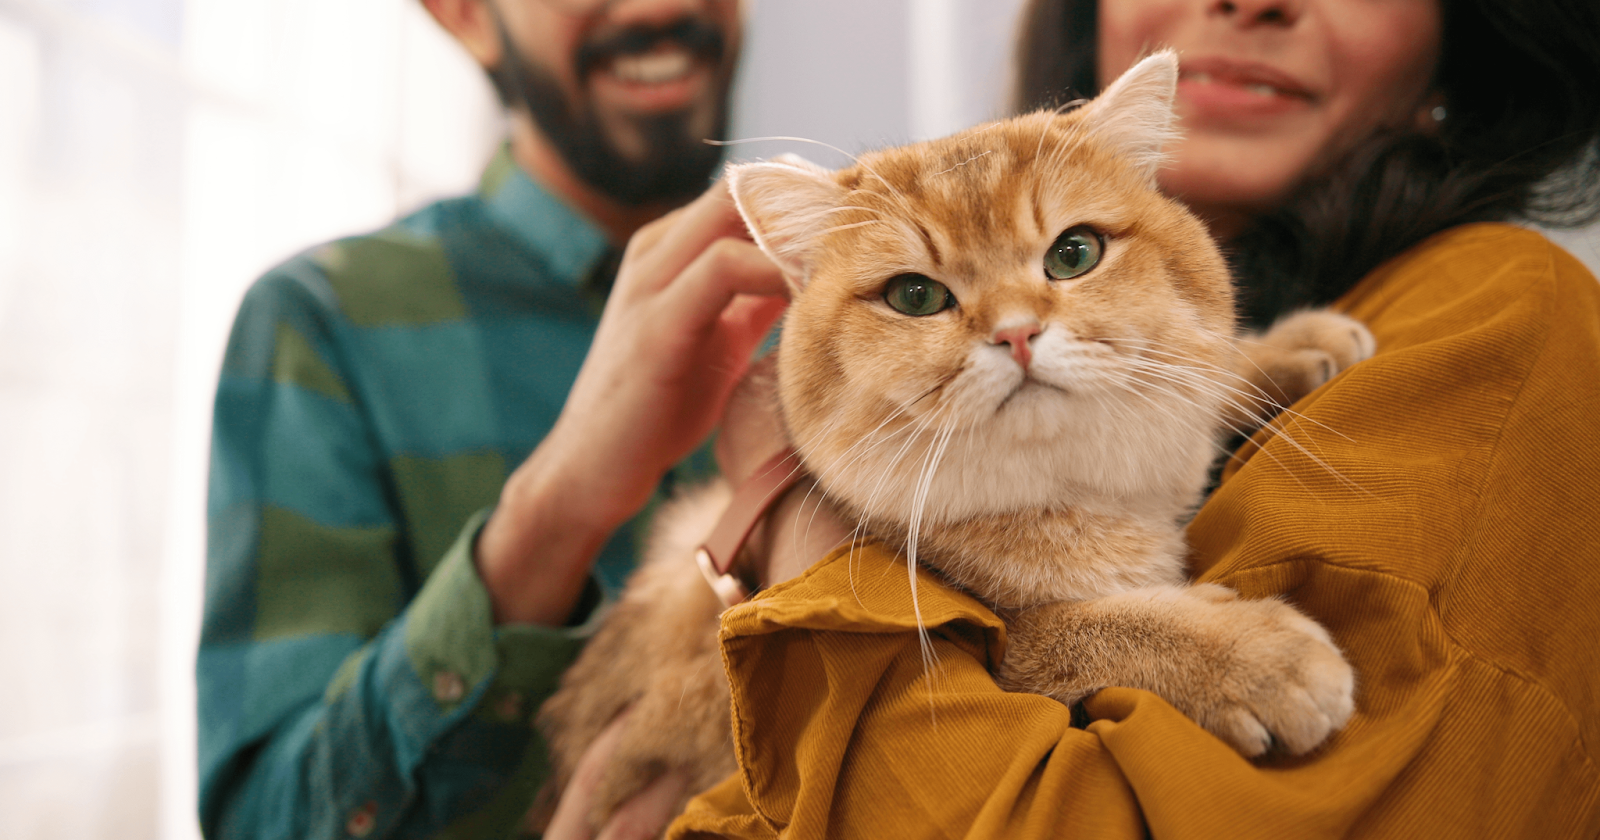 Is Your Cat Jealous? 8 Signs to Look for